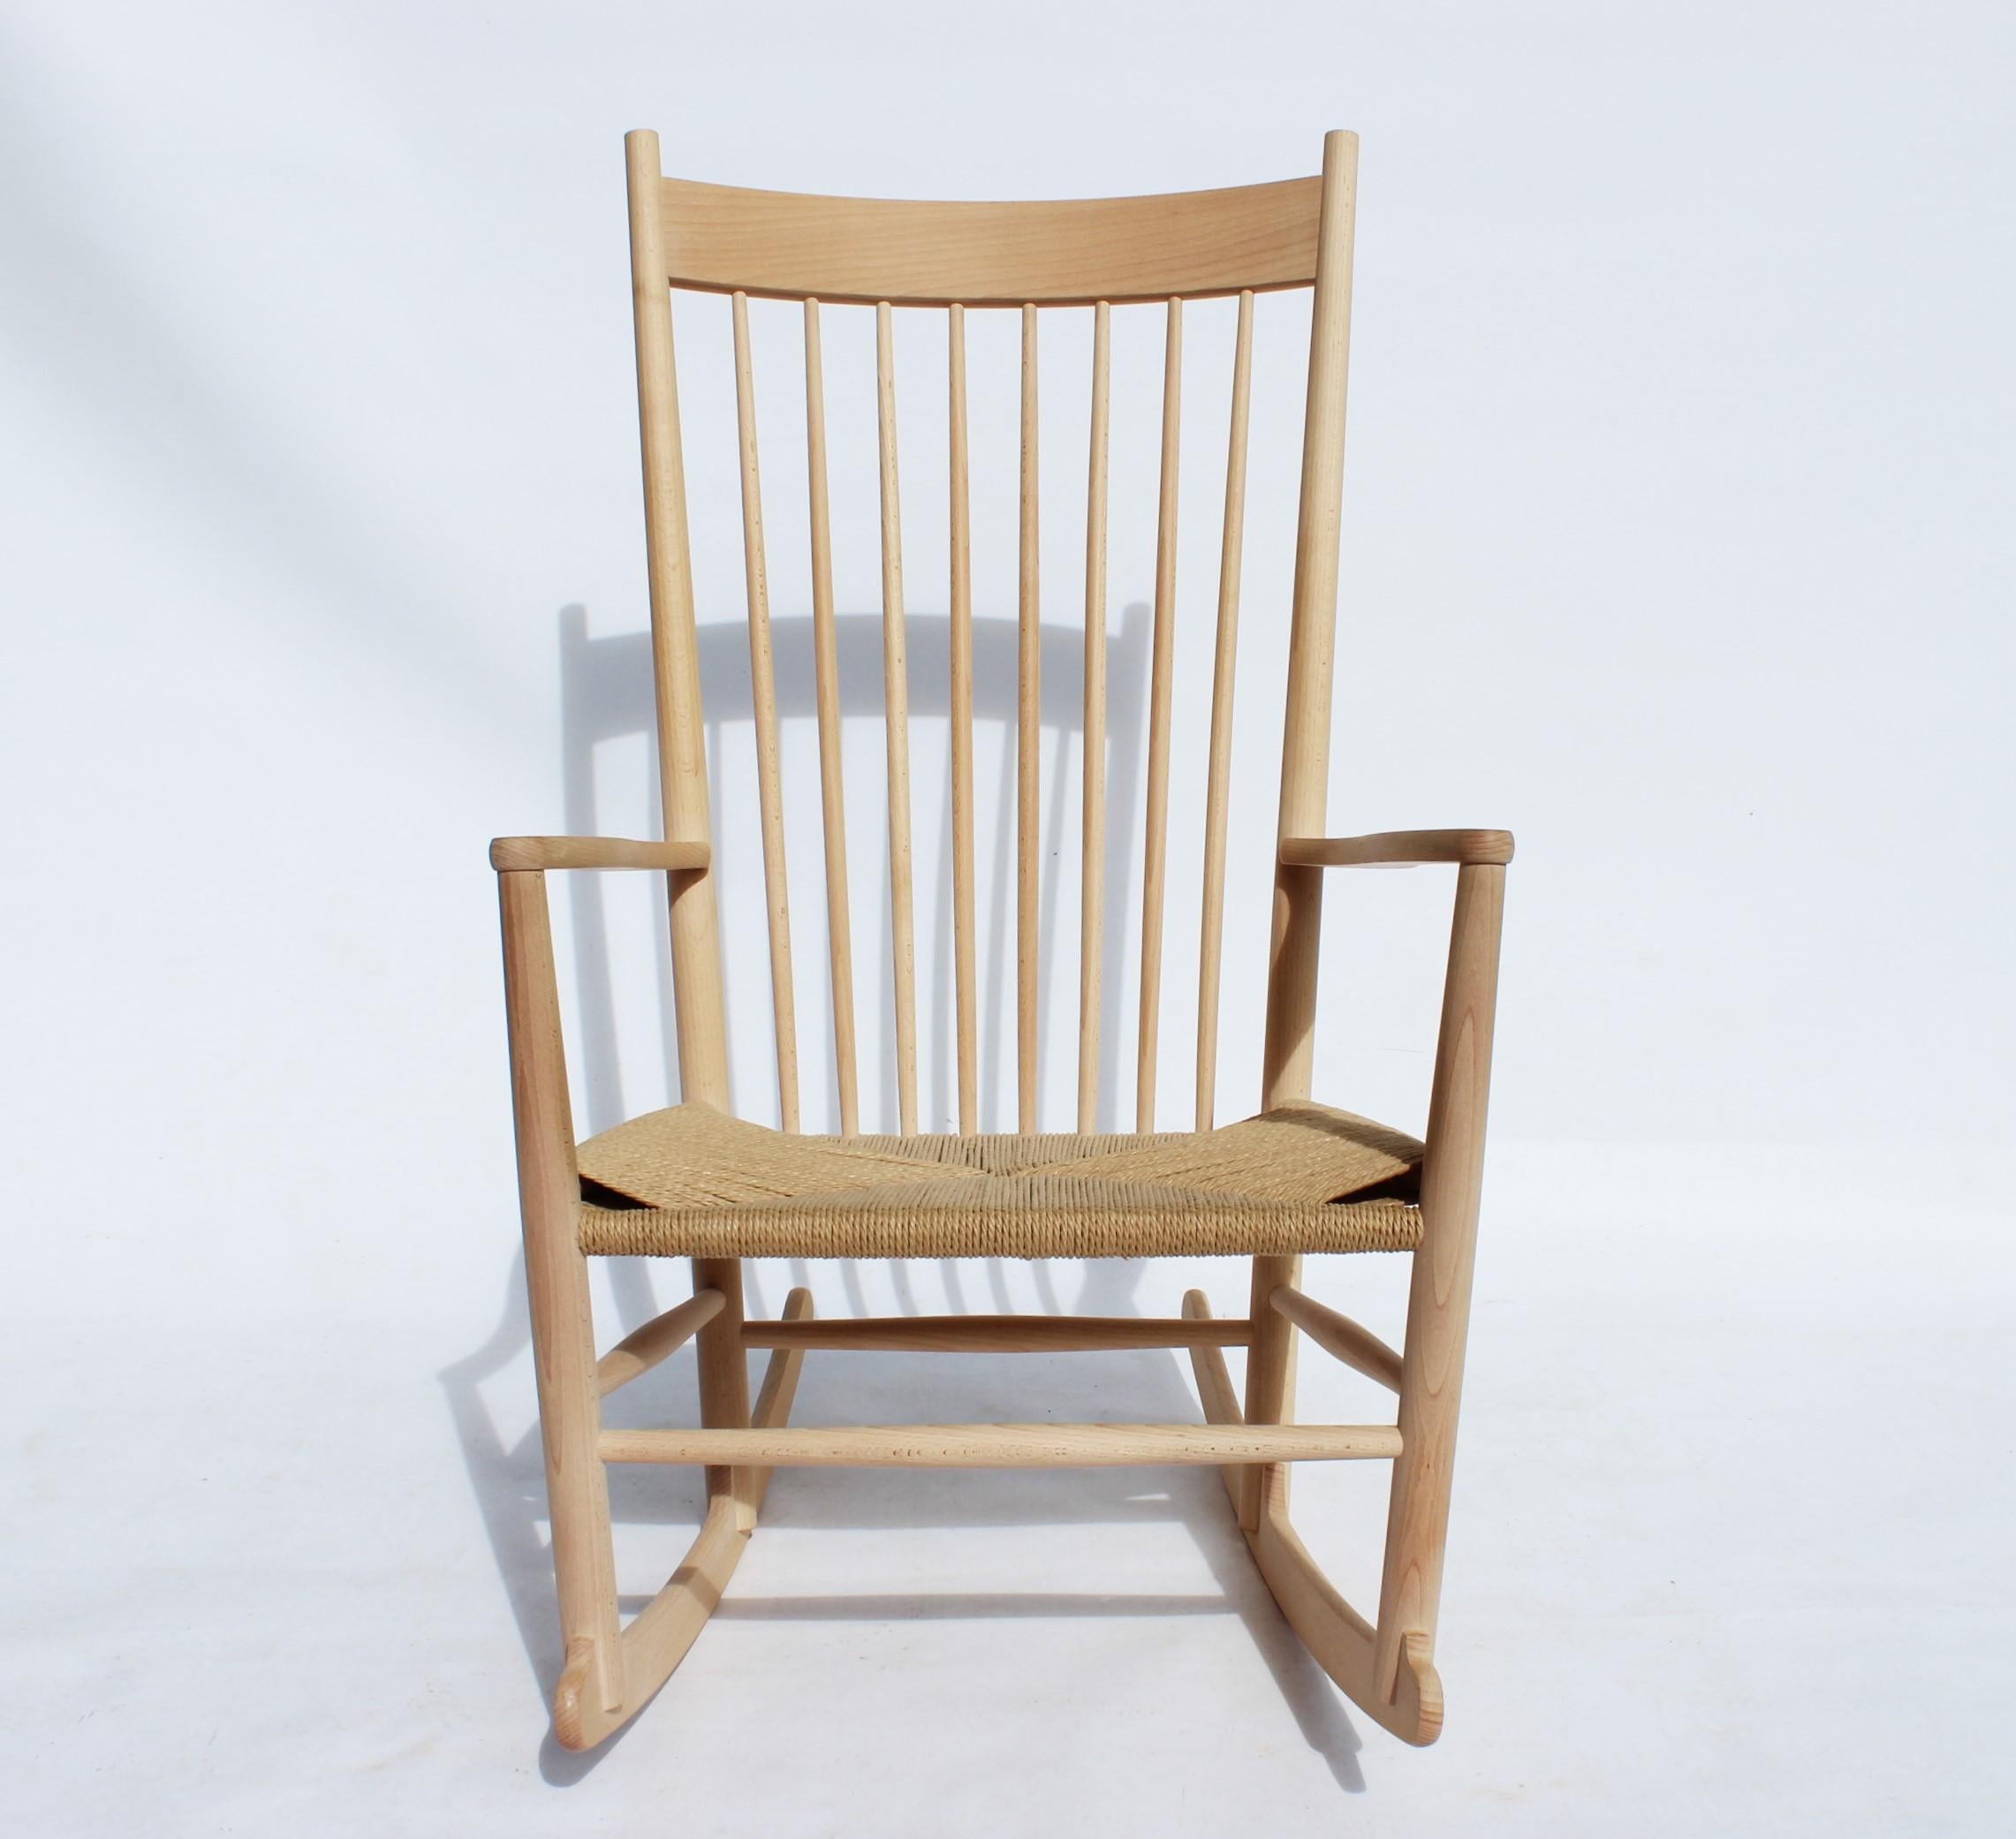 Rocking chair, model J16, of beech and paper cord, designed by Hans J. Wegner in 1944 and manufactured by Fredericia Furniture. The chair is in great vintage condition.